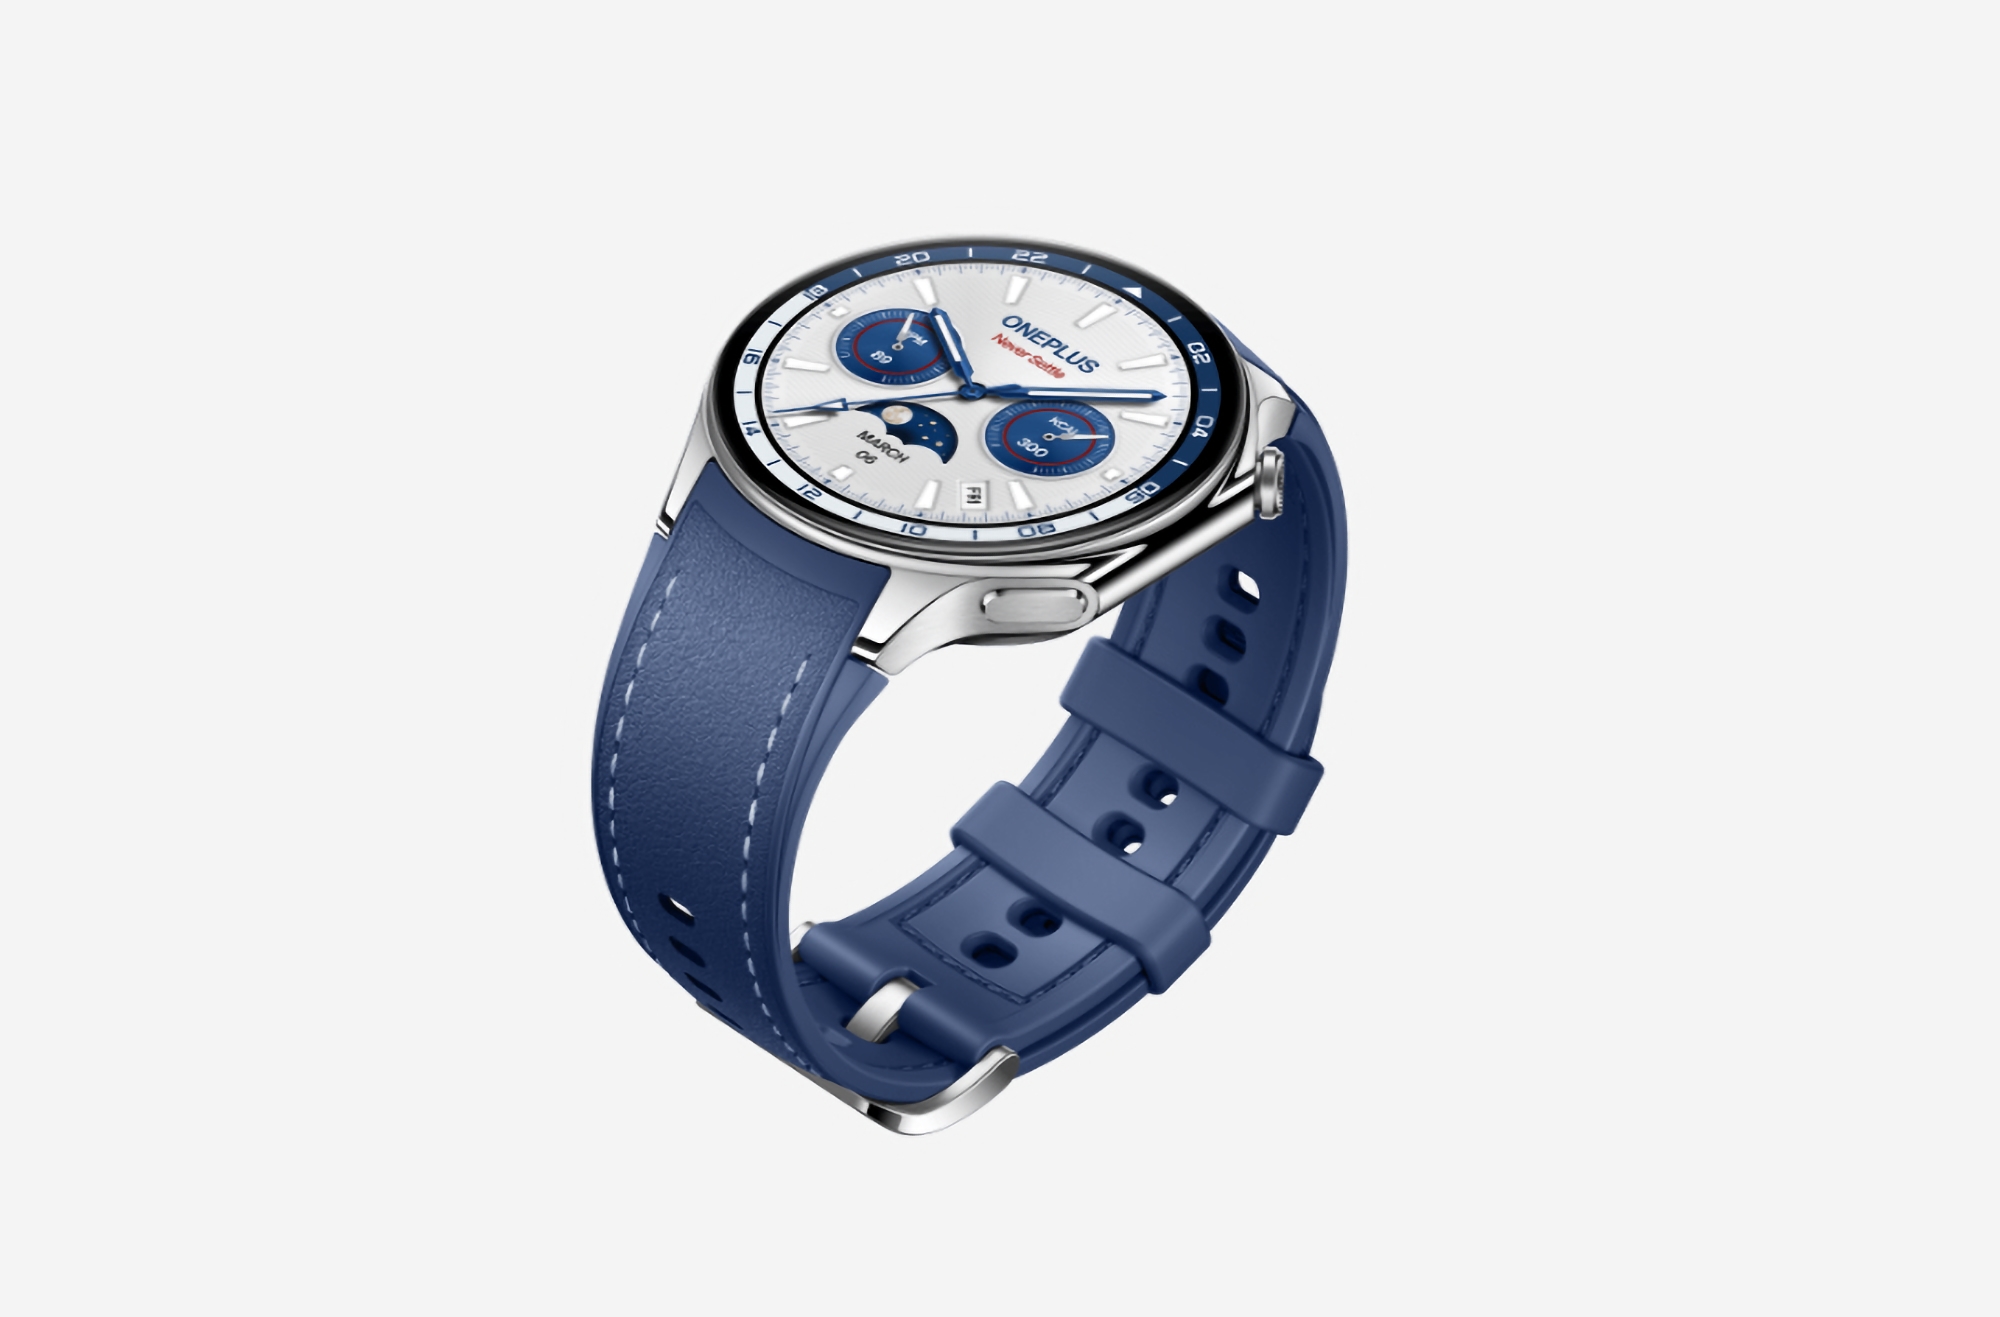 OnePlus Watch 2 Nordic Blue Edition debuted in Europe: a special version of the OnePlus Watch 2 with a Scandinavian design and a price of €349